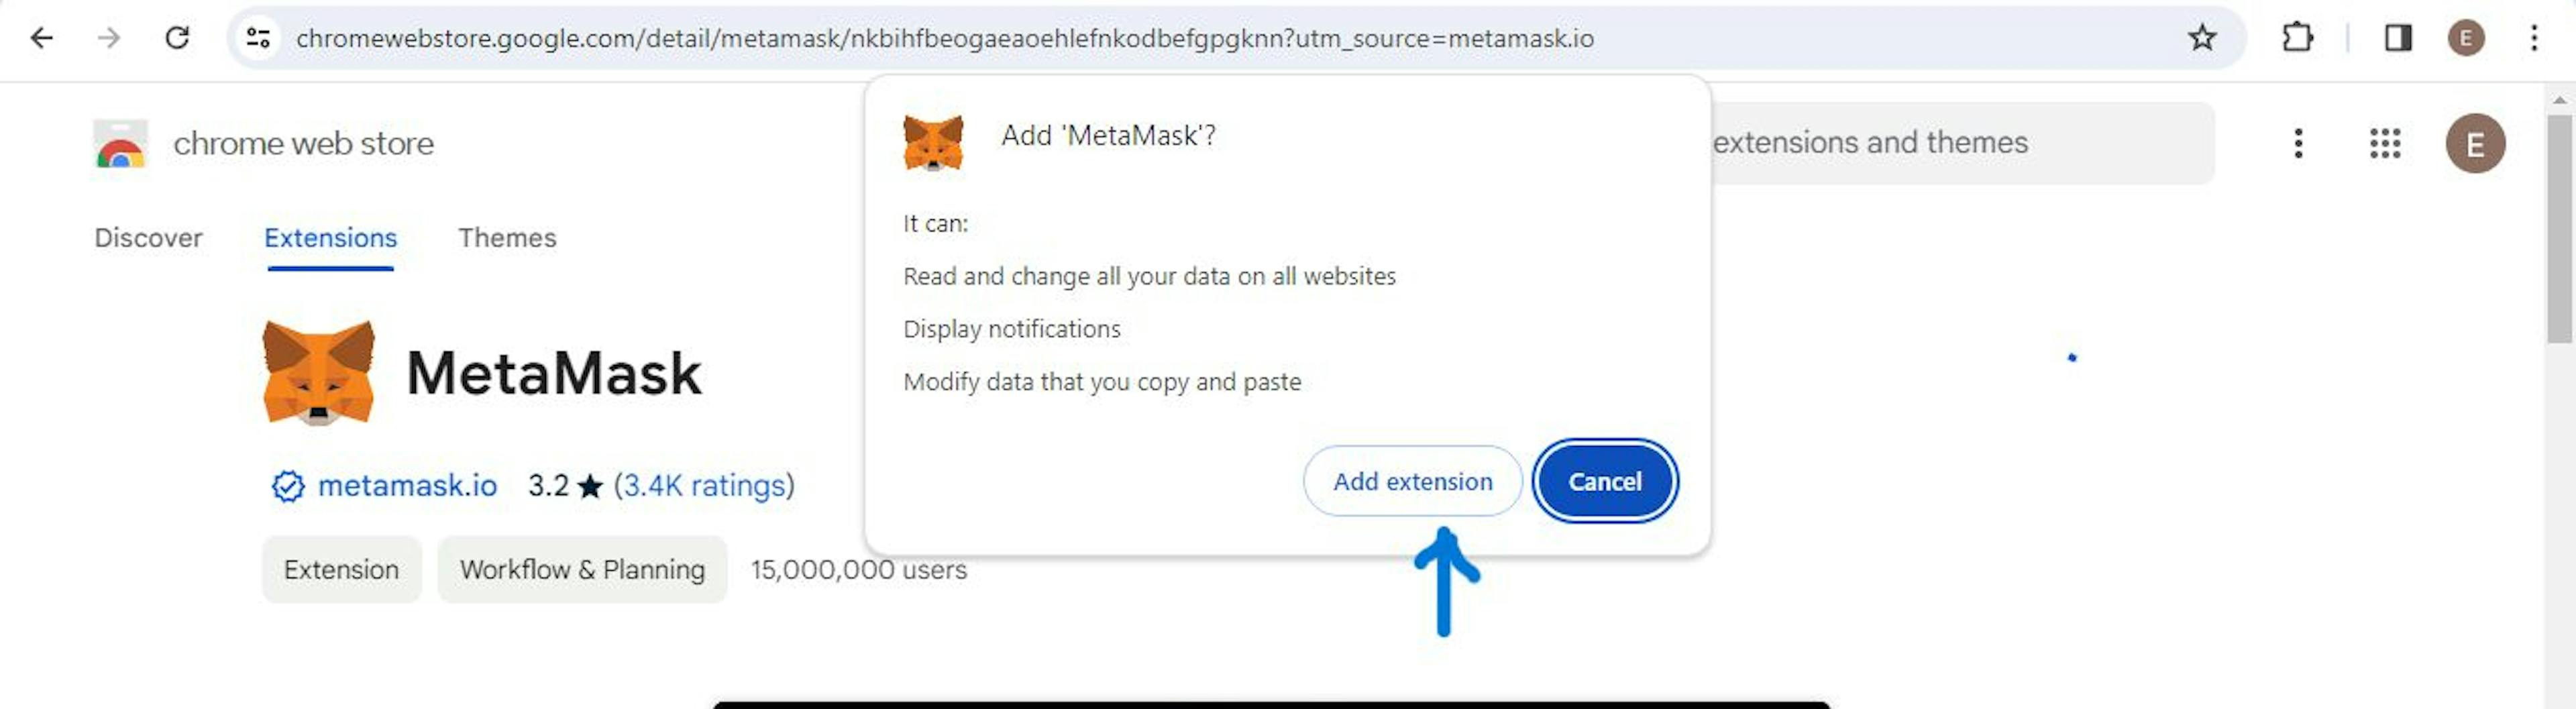 Image showing how to add MetaMask extension to Chrome browser.